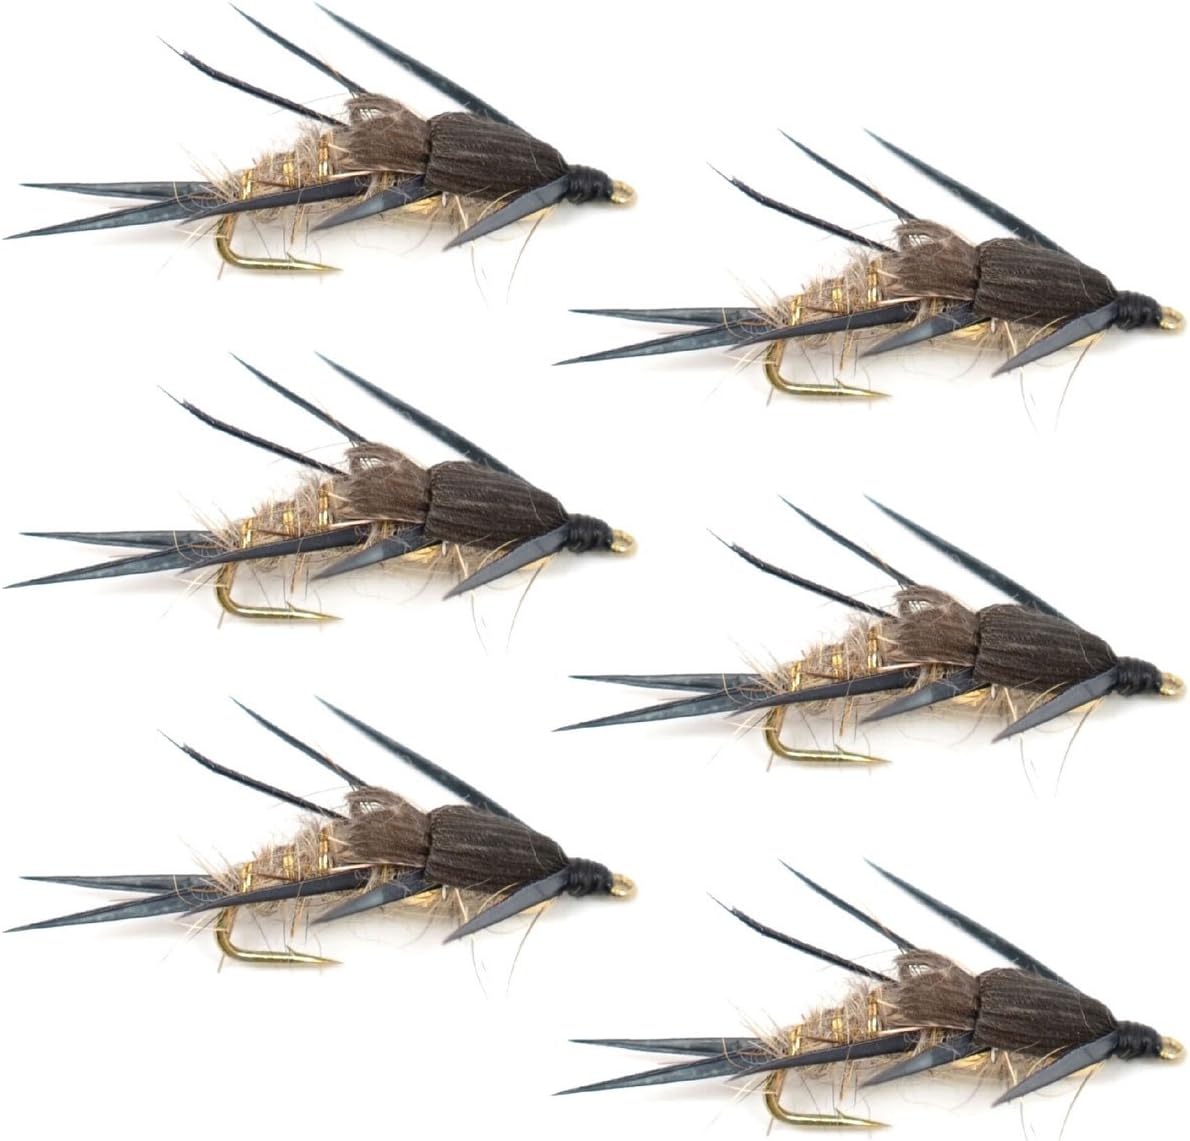 Double Bead Gold Ribbed Hare's Ear Nymph Fly Fishing Flies - Trout and Bass Wet Fly - 6 Flies Hook Size 10